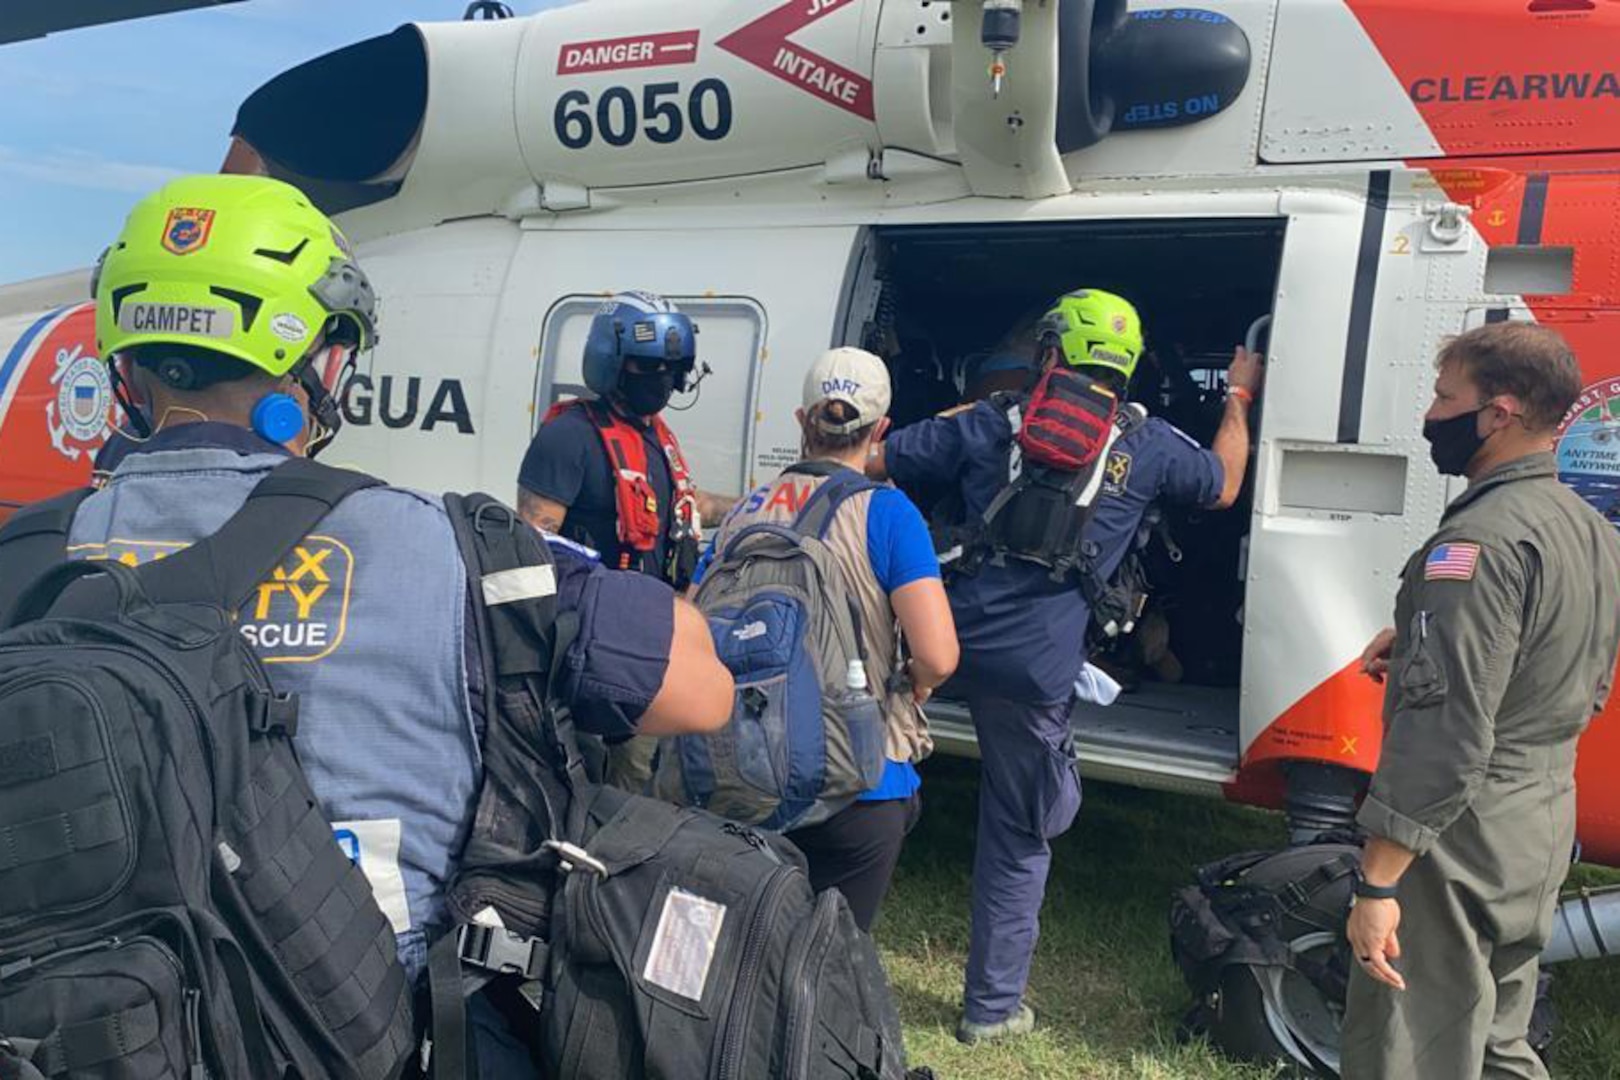 Five people loaded with gear climb into a helicopter.